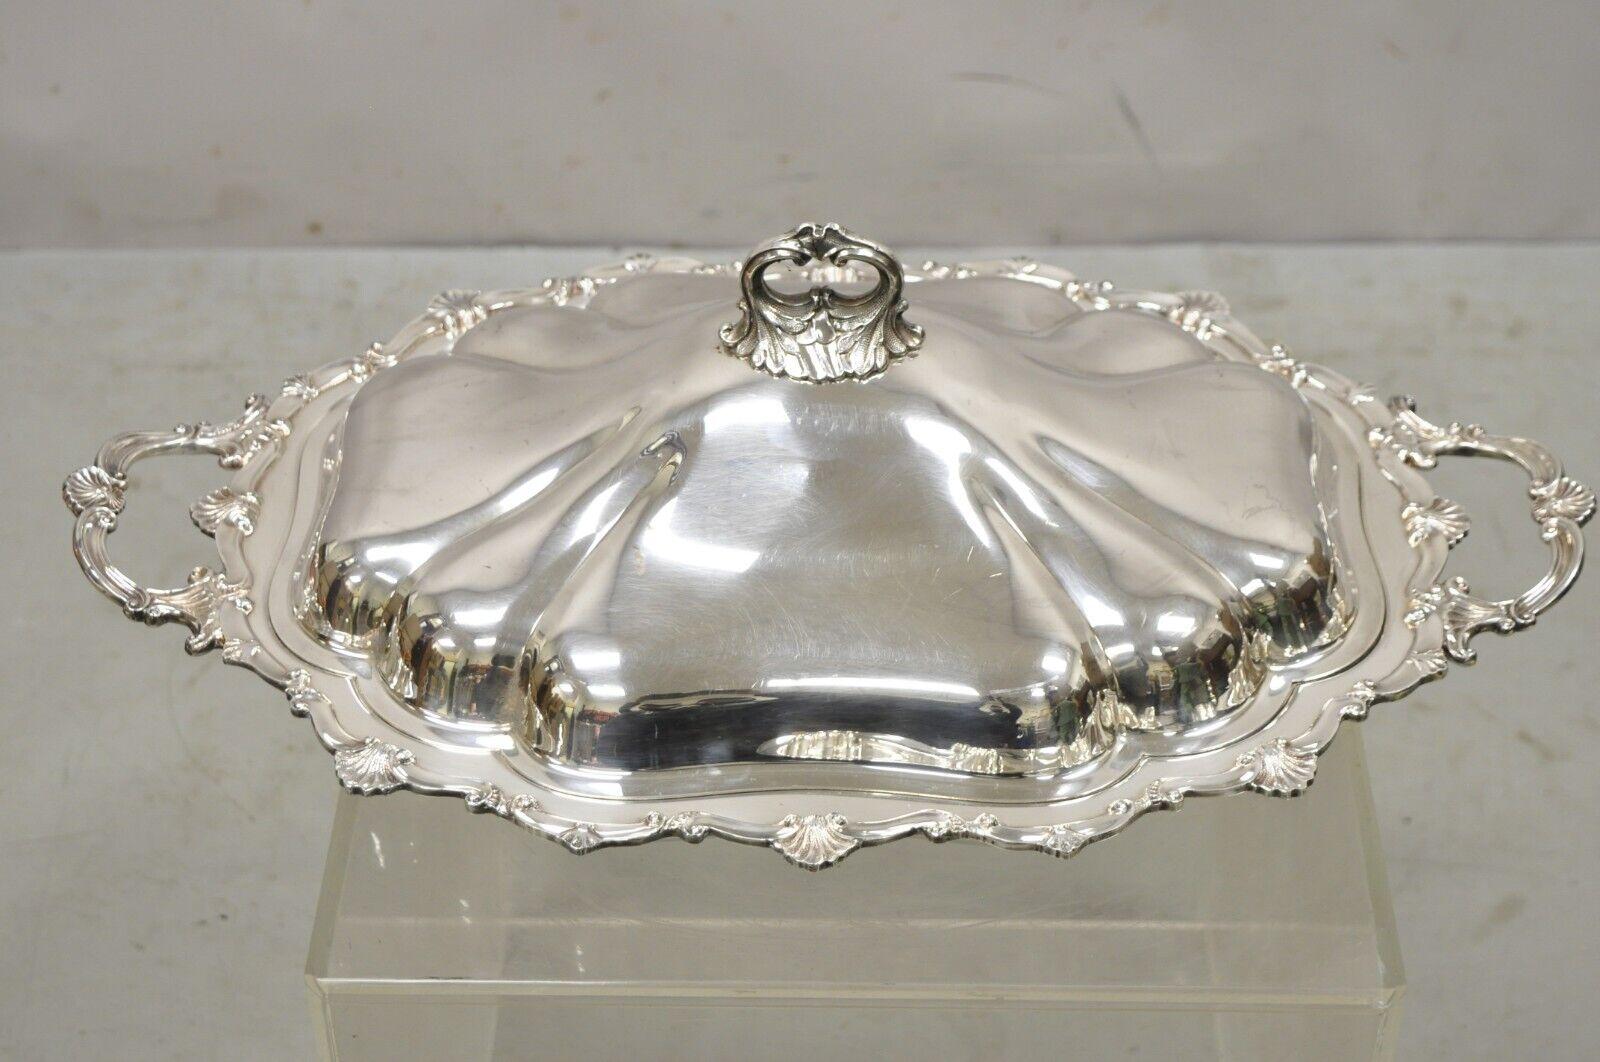 Antique English Victorian silver plate plidded serving tureen platter dish. Item features raised on ball form feet, ornate scalloped form, fancy lid and handle, very nice antique item, quality craftsmanship, great style and form. circa Early to